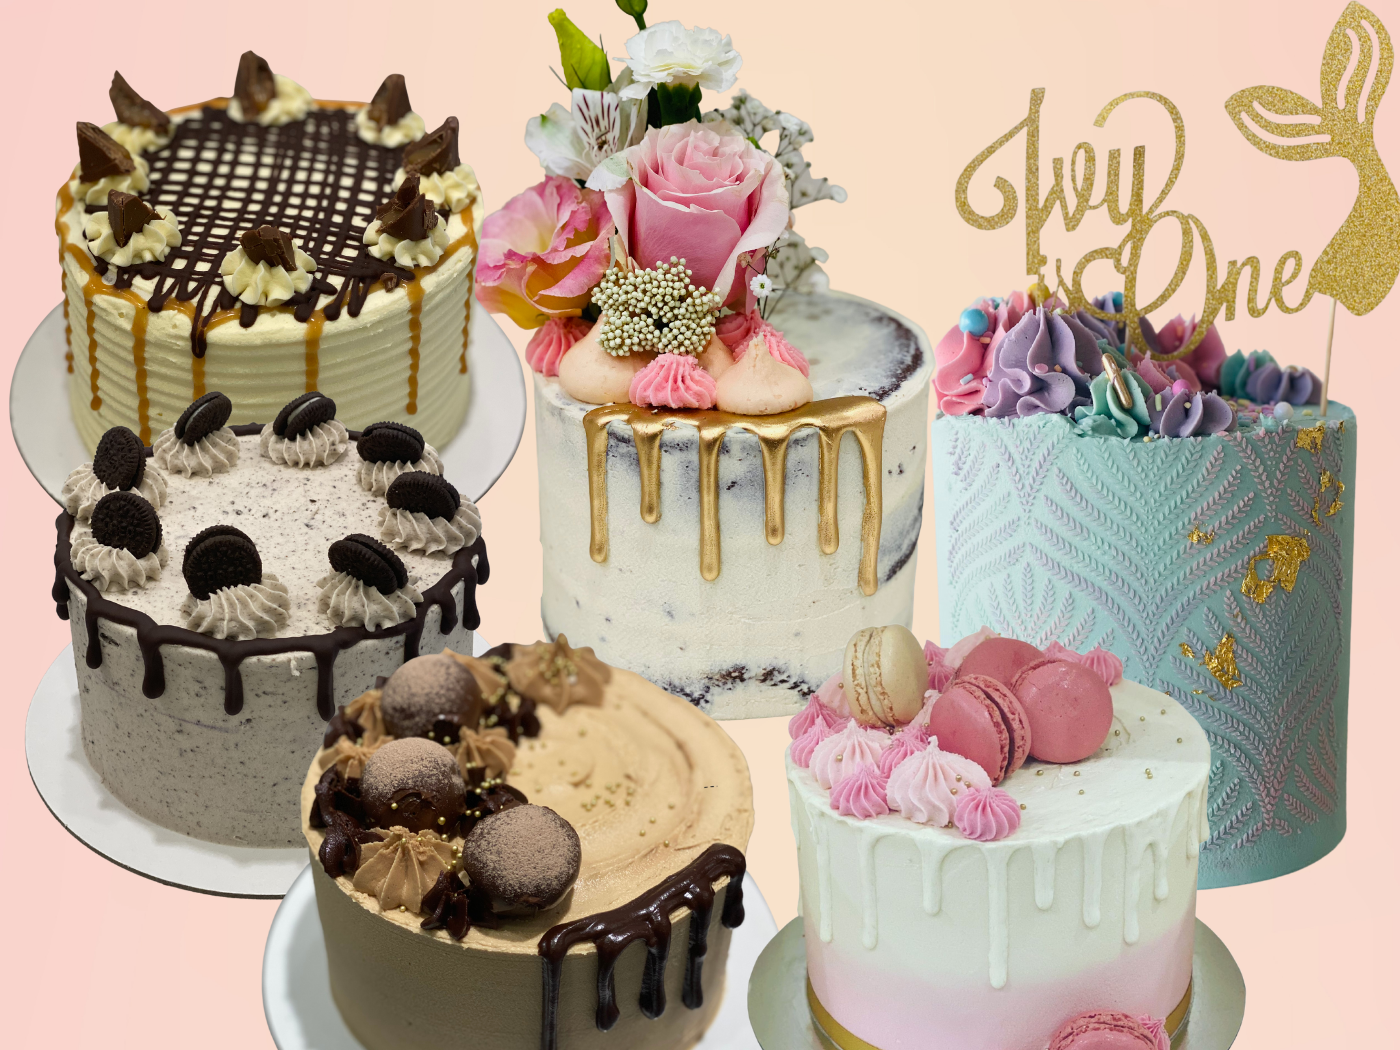 Top more than 88 cake delivery melbourne best - awesomeenglish.edu.vn